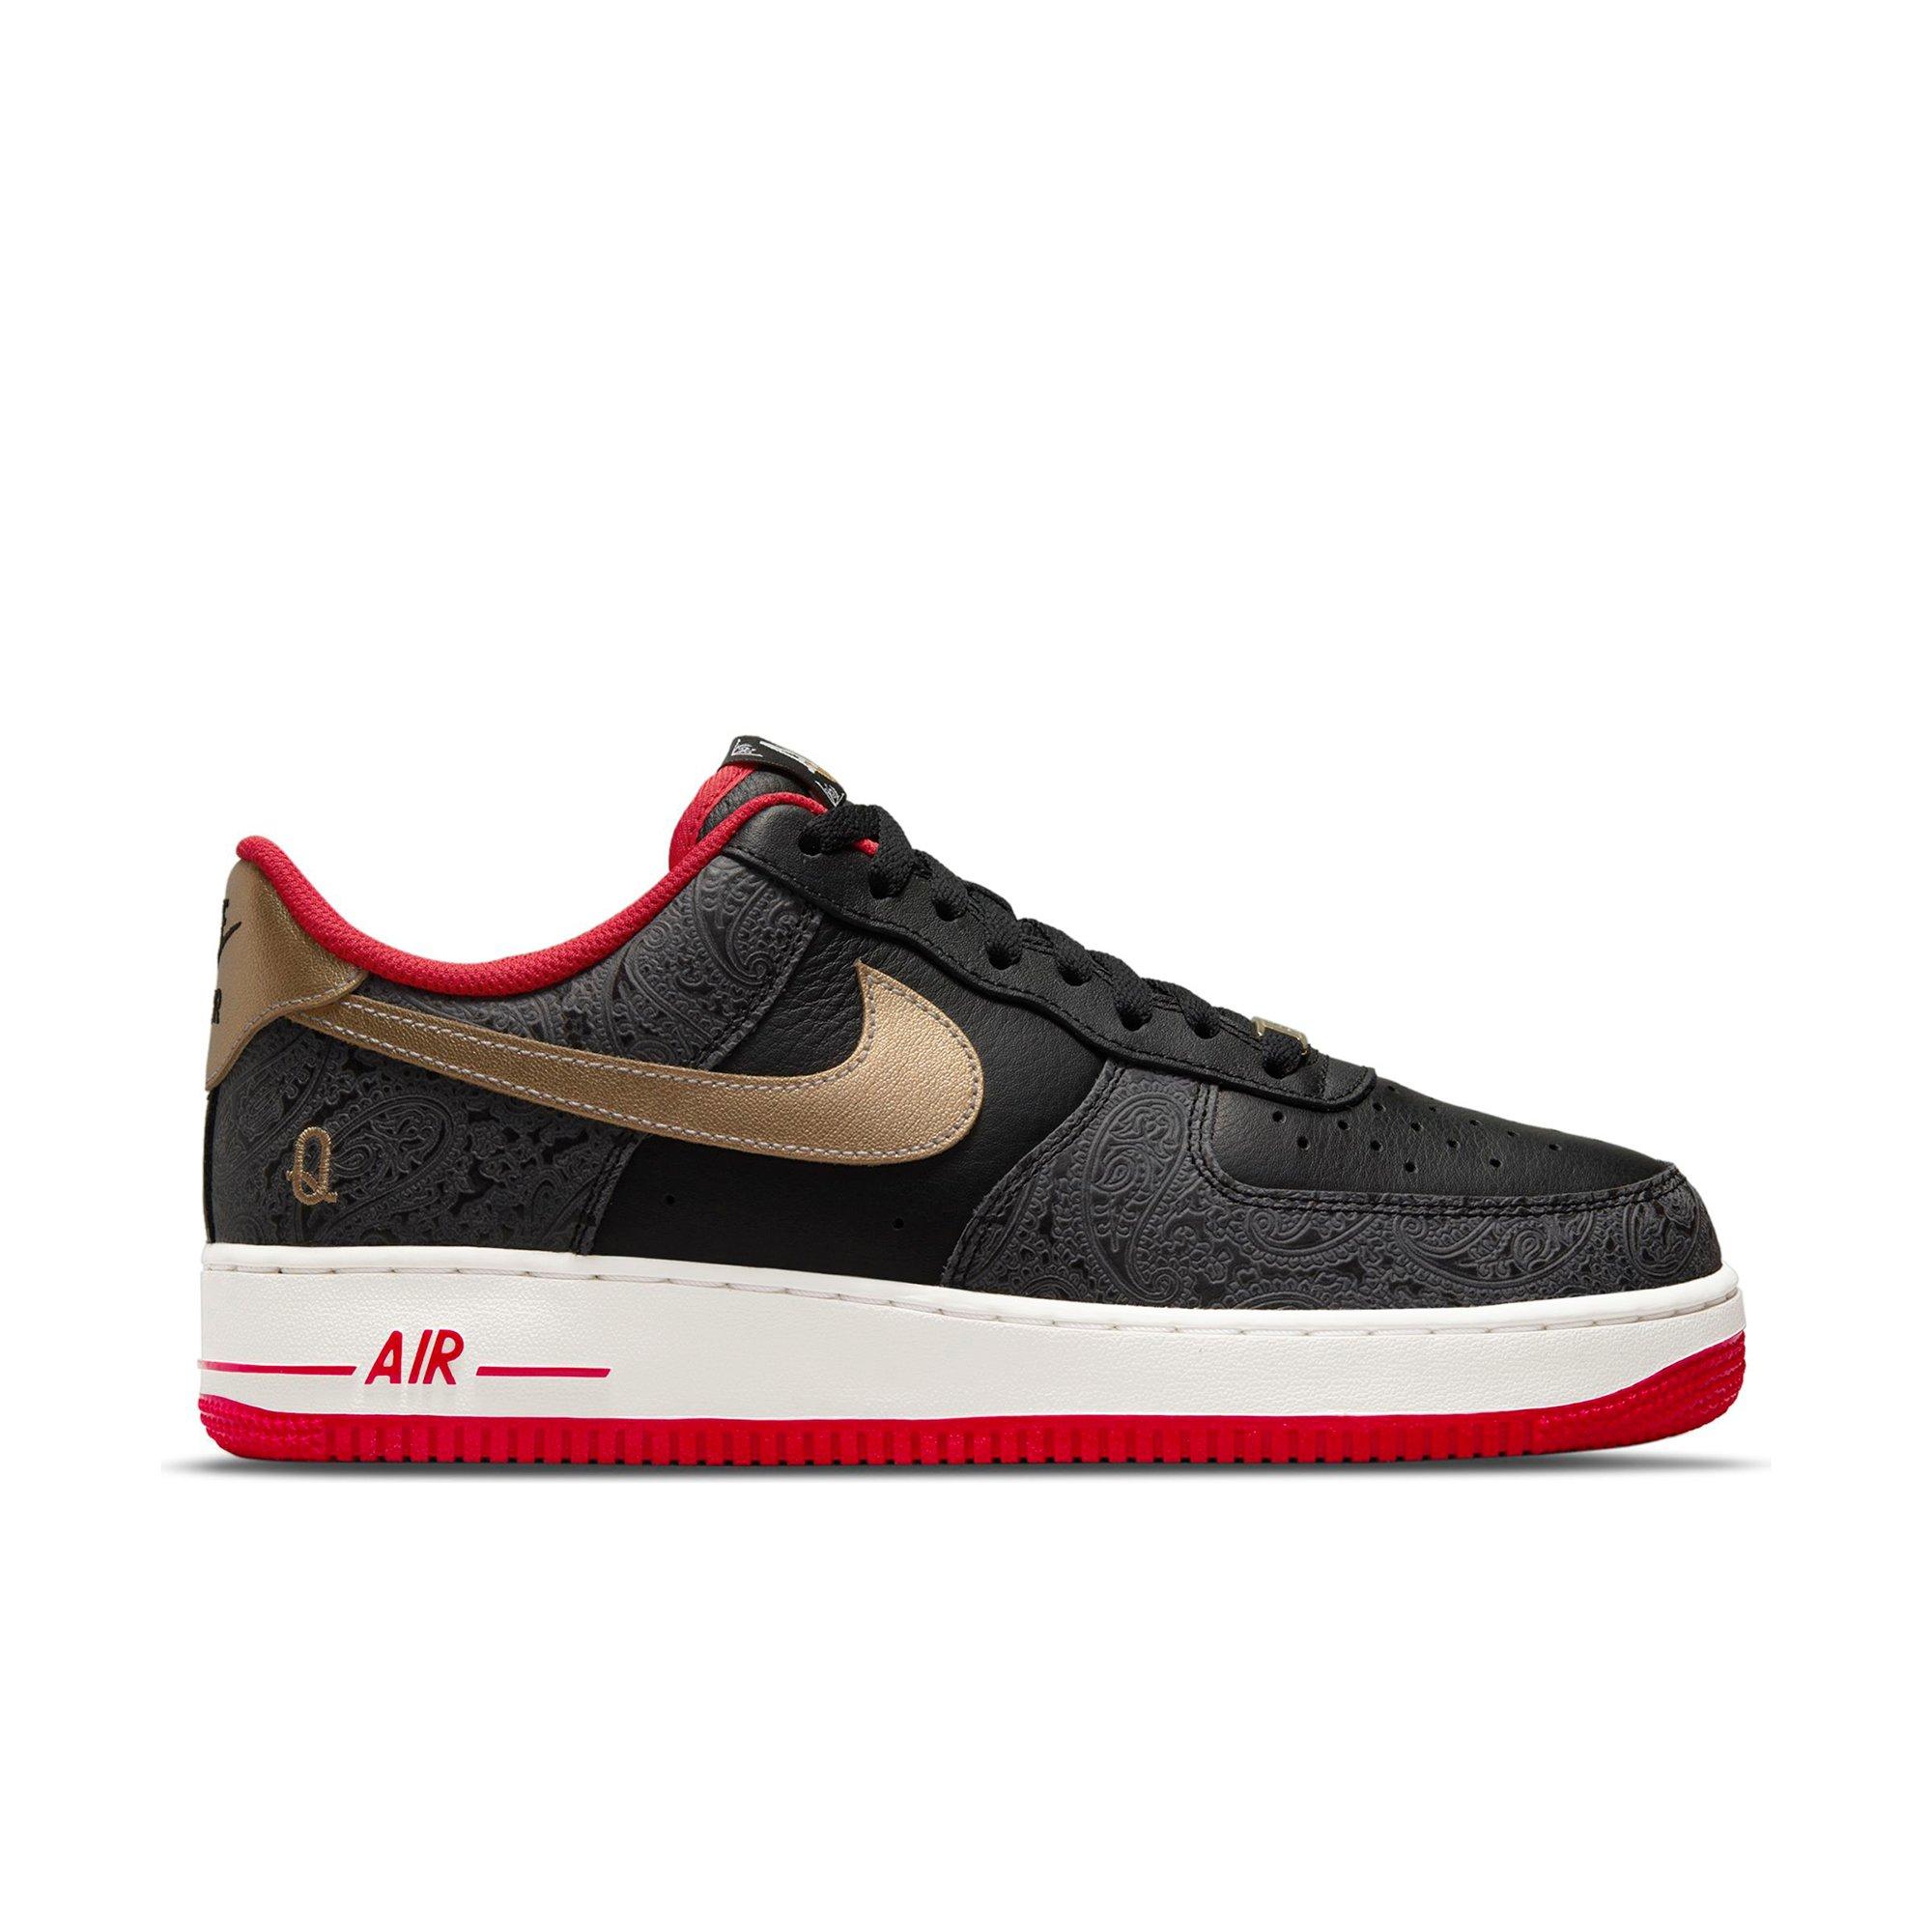 Nike Air Force 1 '07 LV8 Black, Red, Purple & Gold